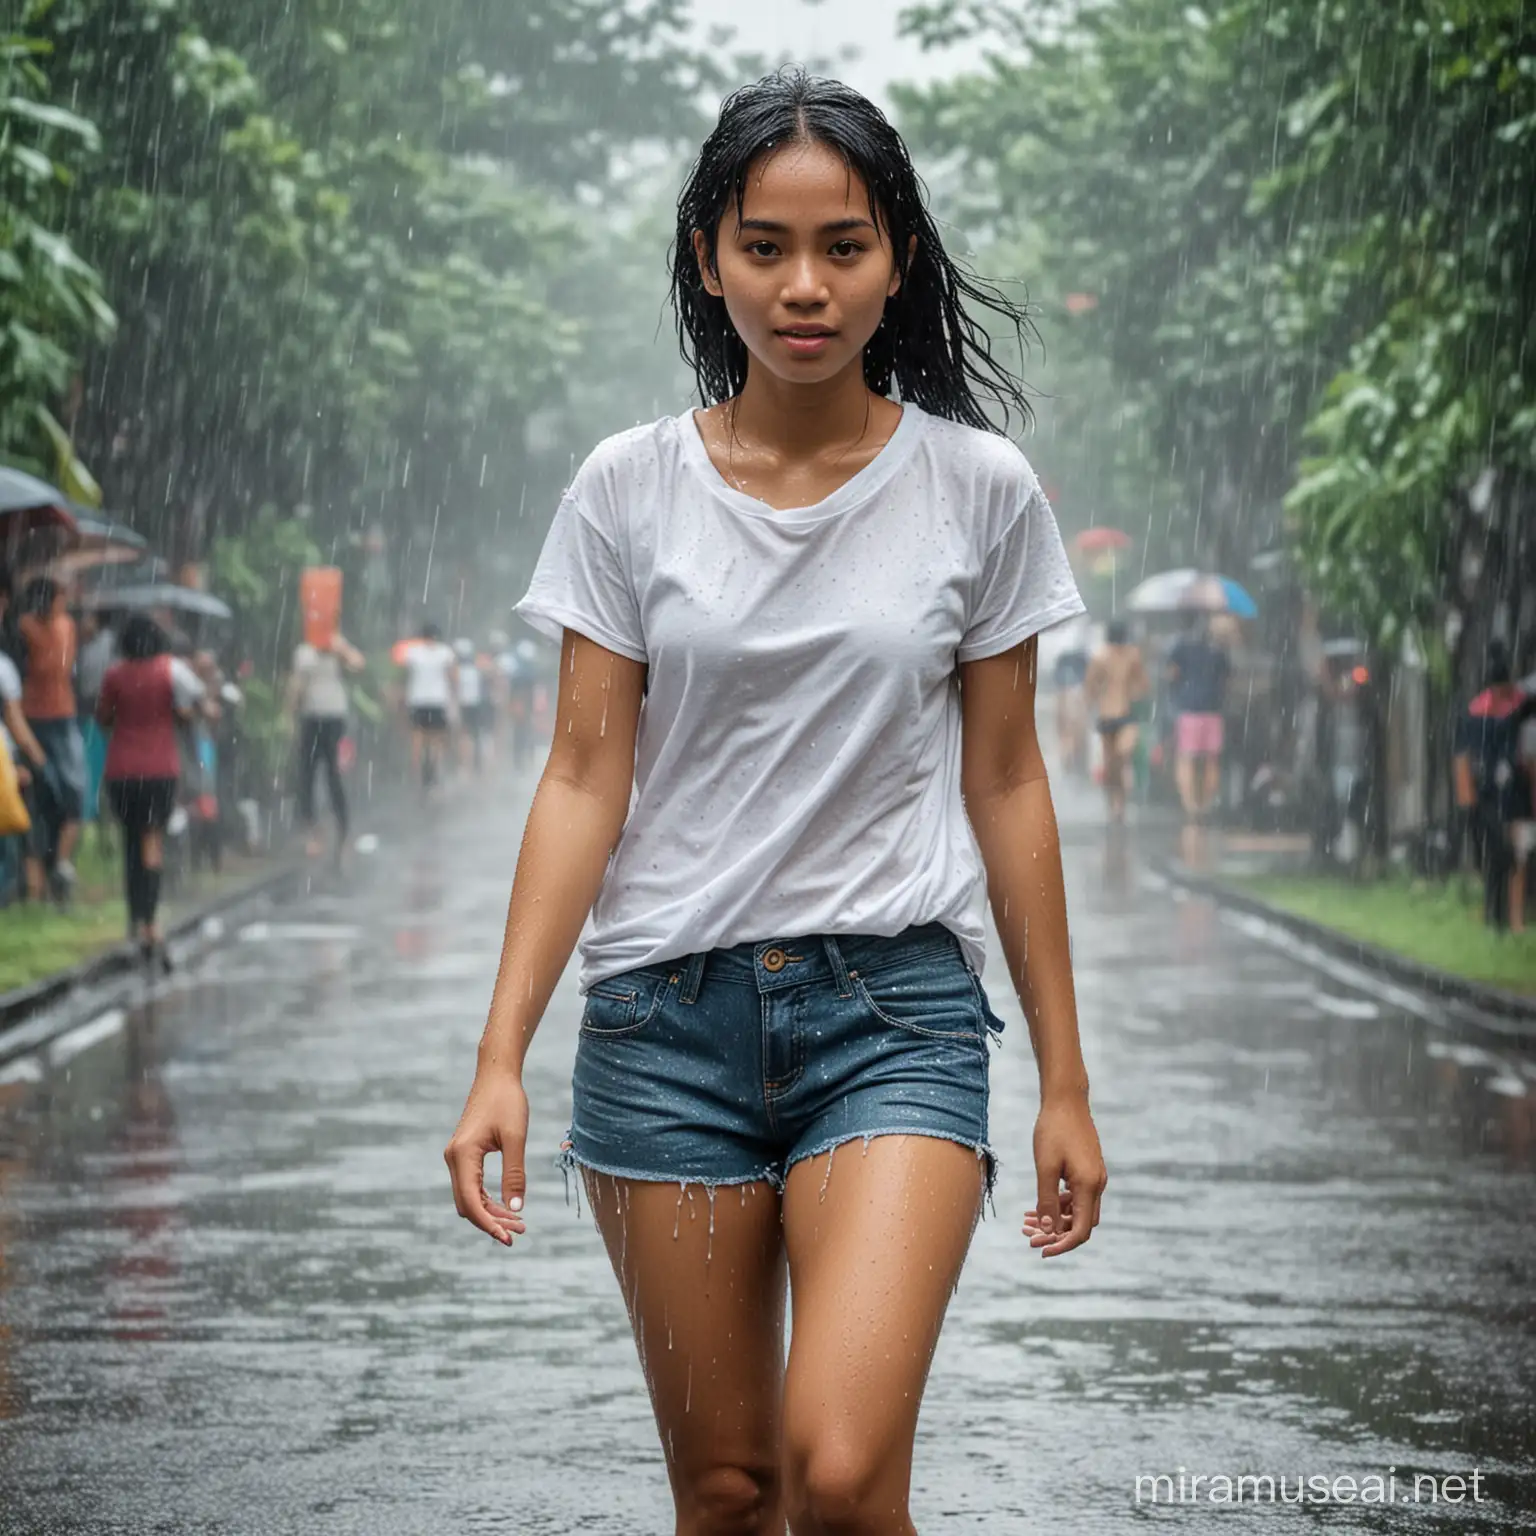 Young Indonesian Woman Soaked in Rain Wearing White Tshirt and Shorts